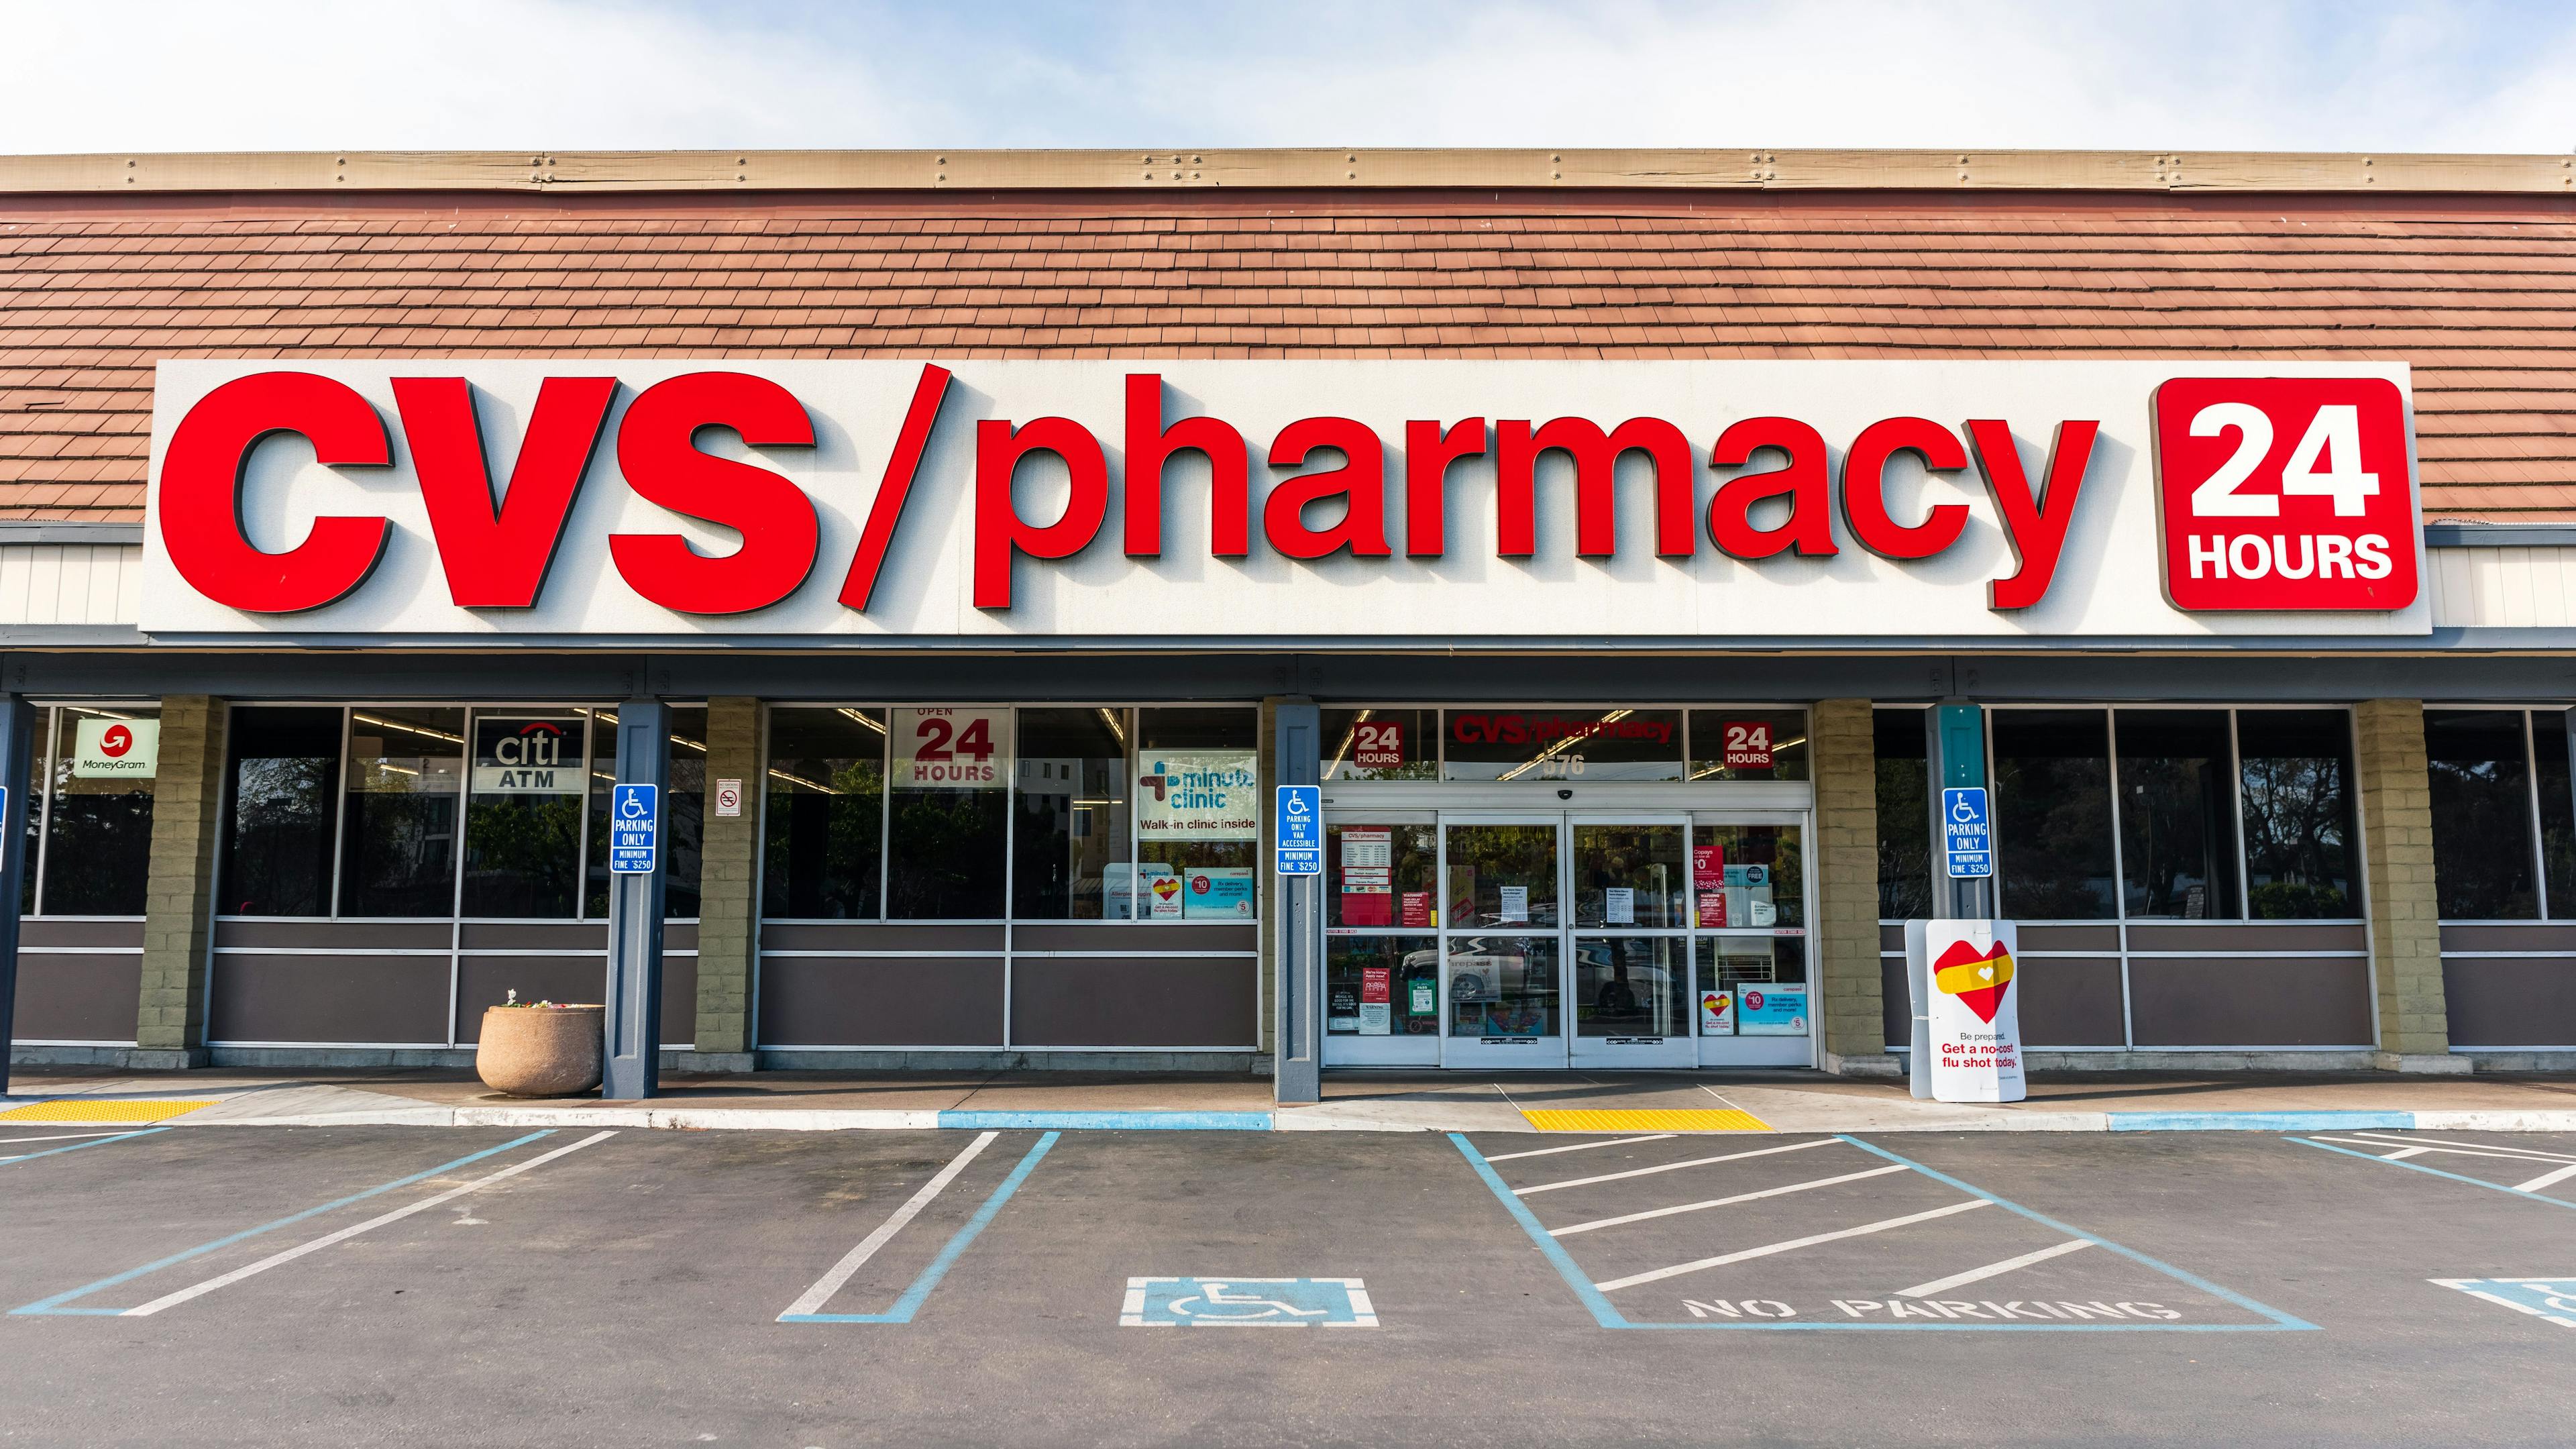 CVS Implements Measures to Improve Working Conditions After More Kansas City Pharmacists Stage Walkouts